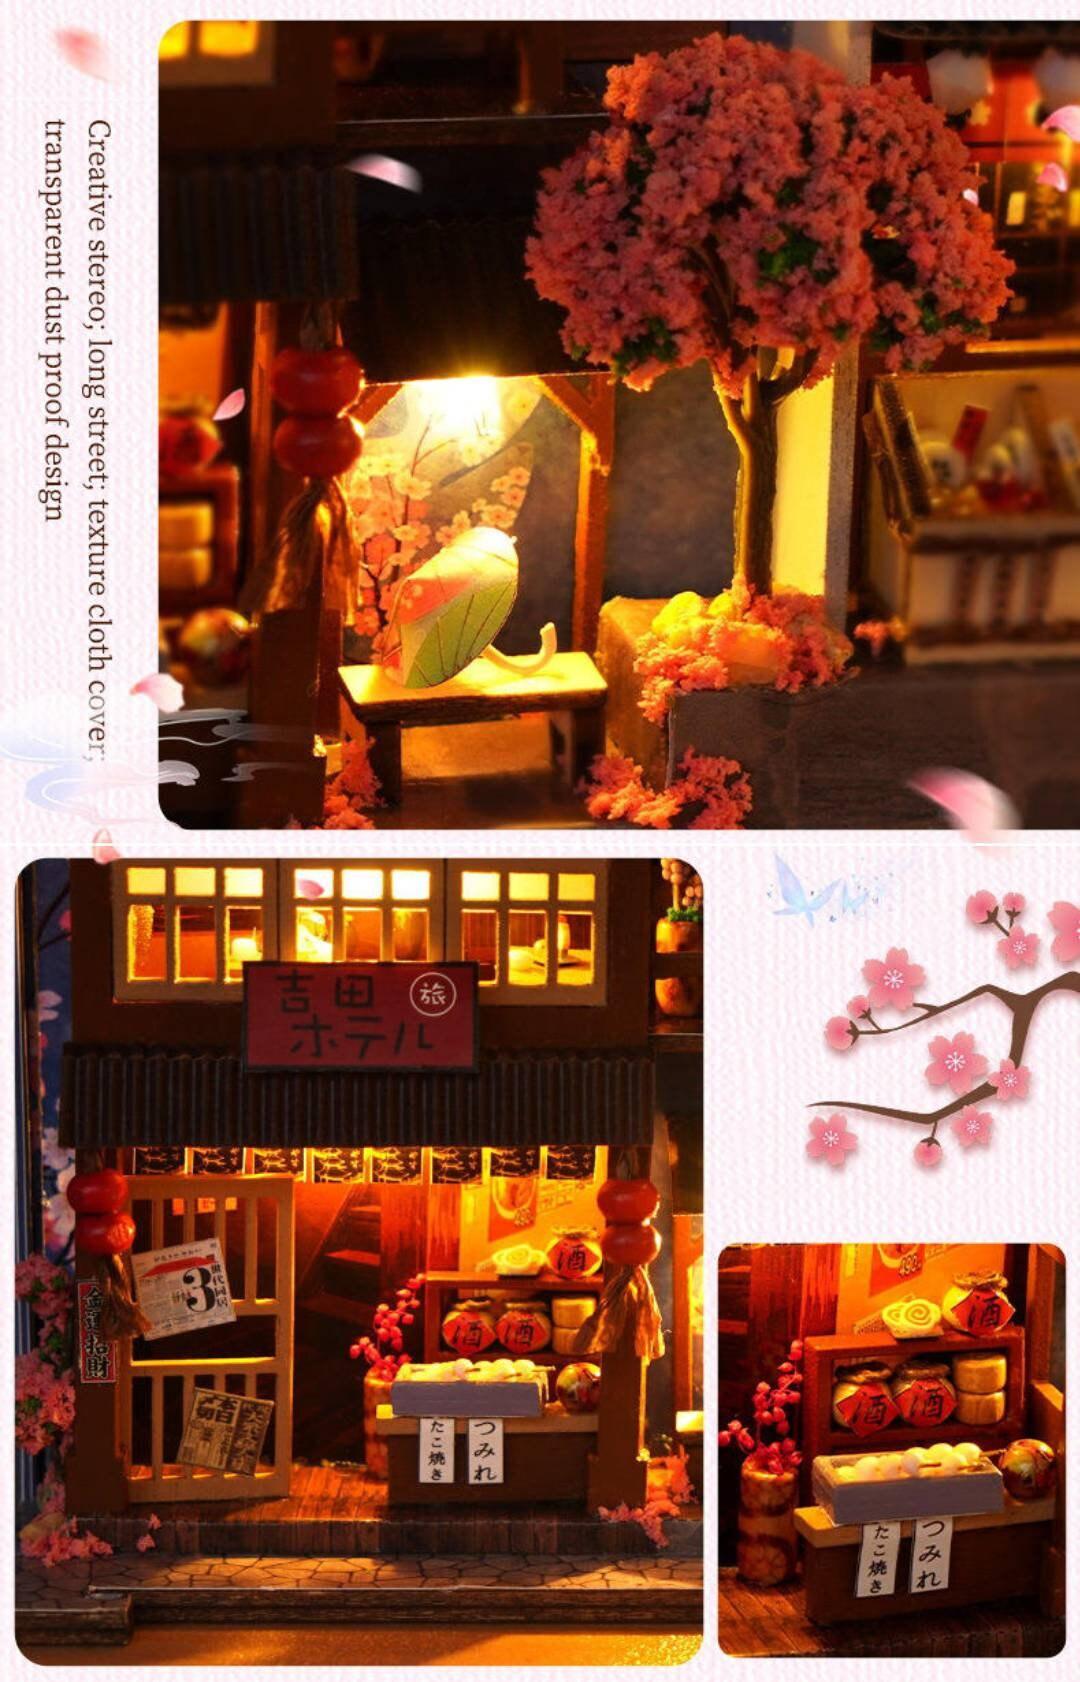 Chongqing Alley Book Nook - DIY Book Nook Kit - Chinese Alley Book Scenery - Book Shelf Insert - Bookcase with Light Miniature Building Kit